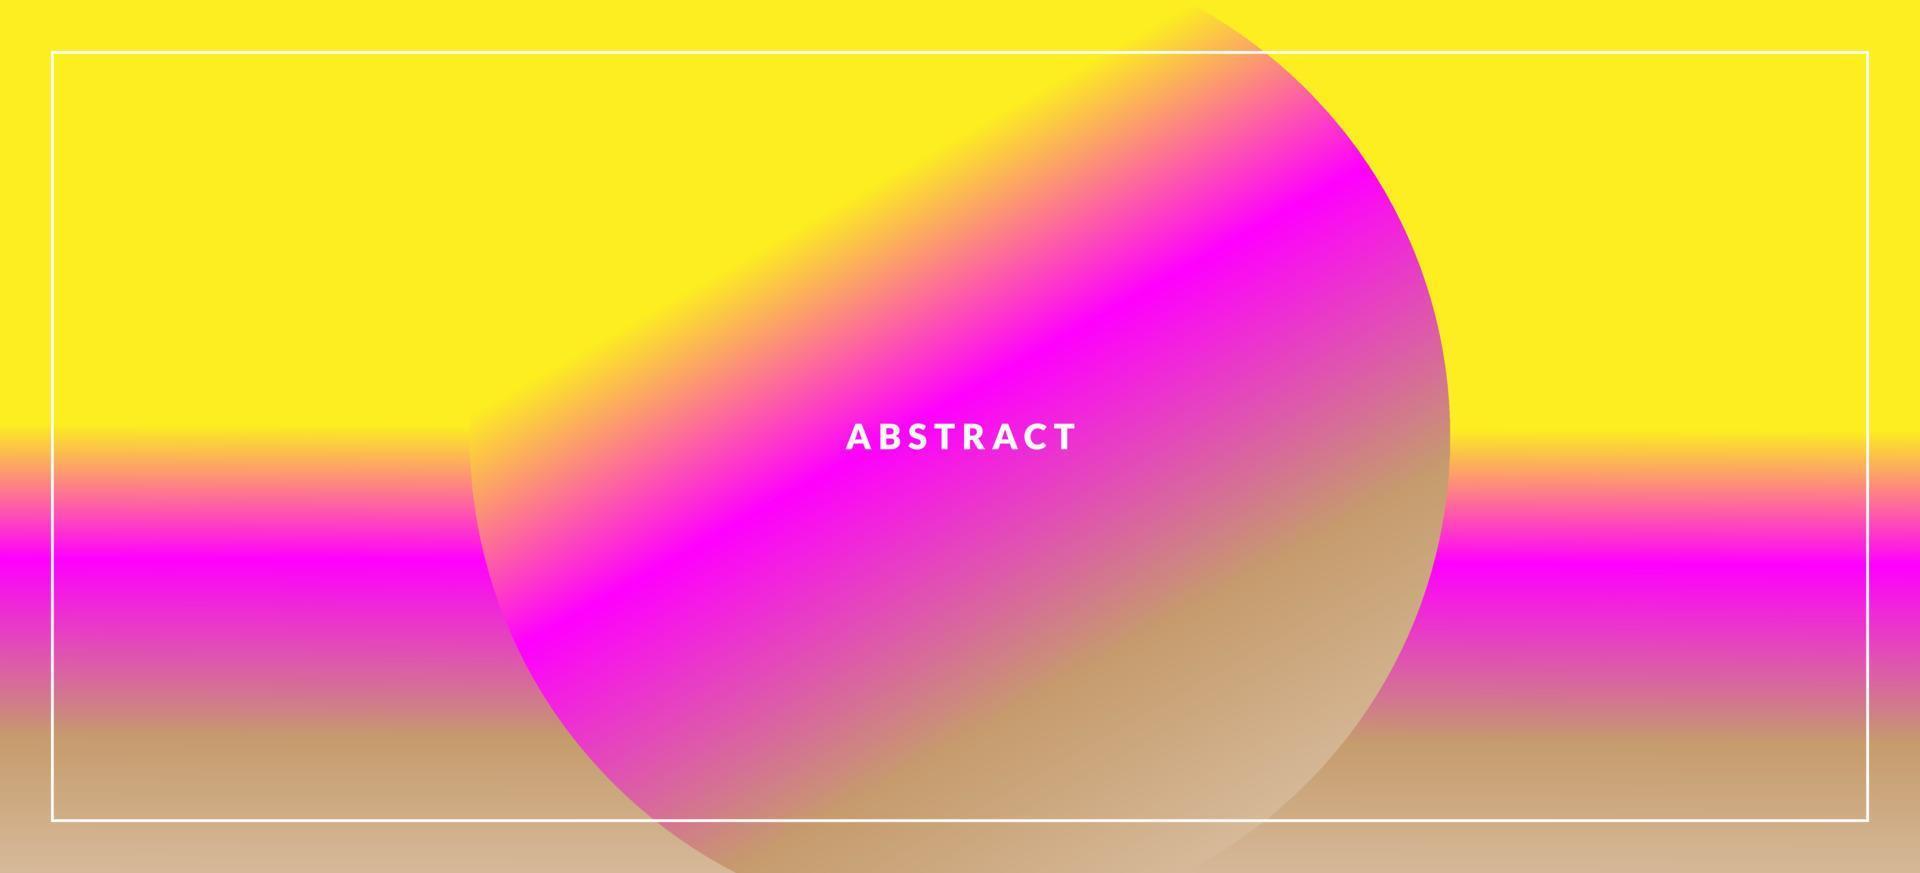 Abstract gradient background for banner, flyer, poster, and free vector